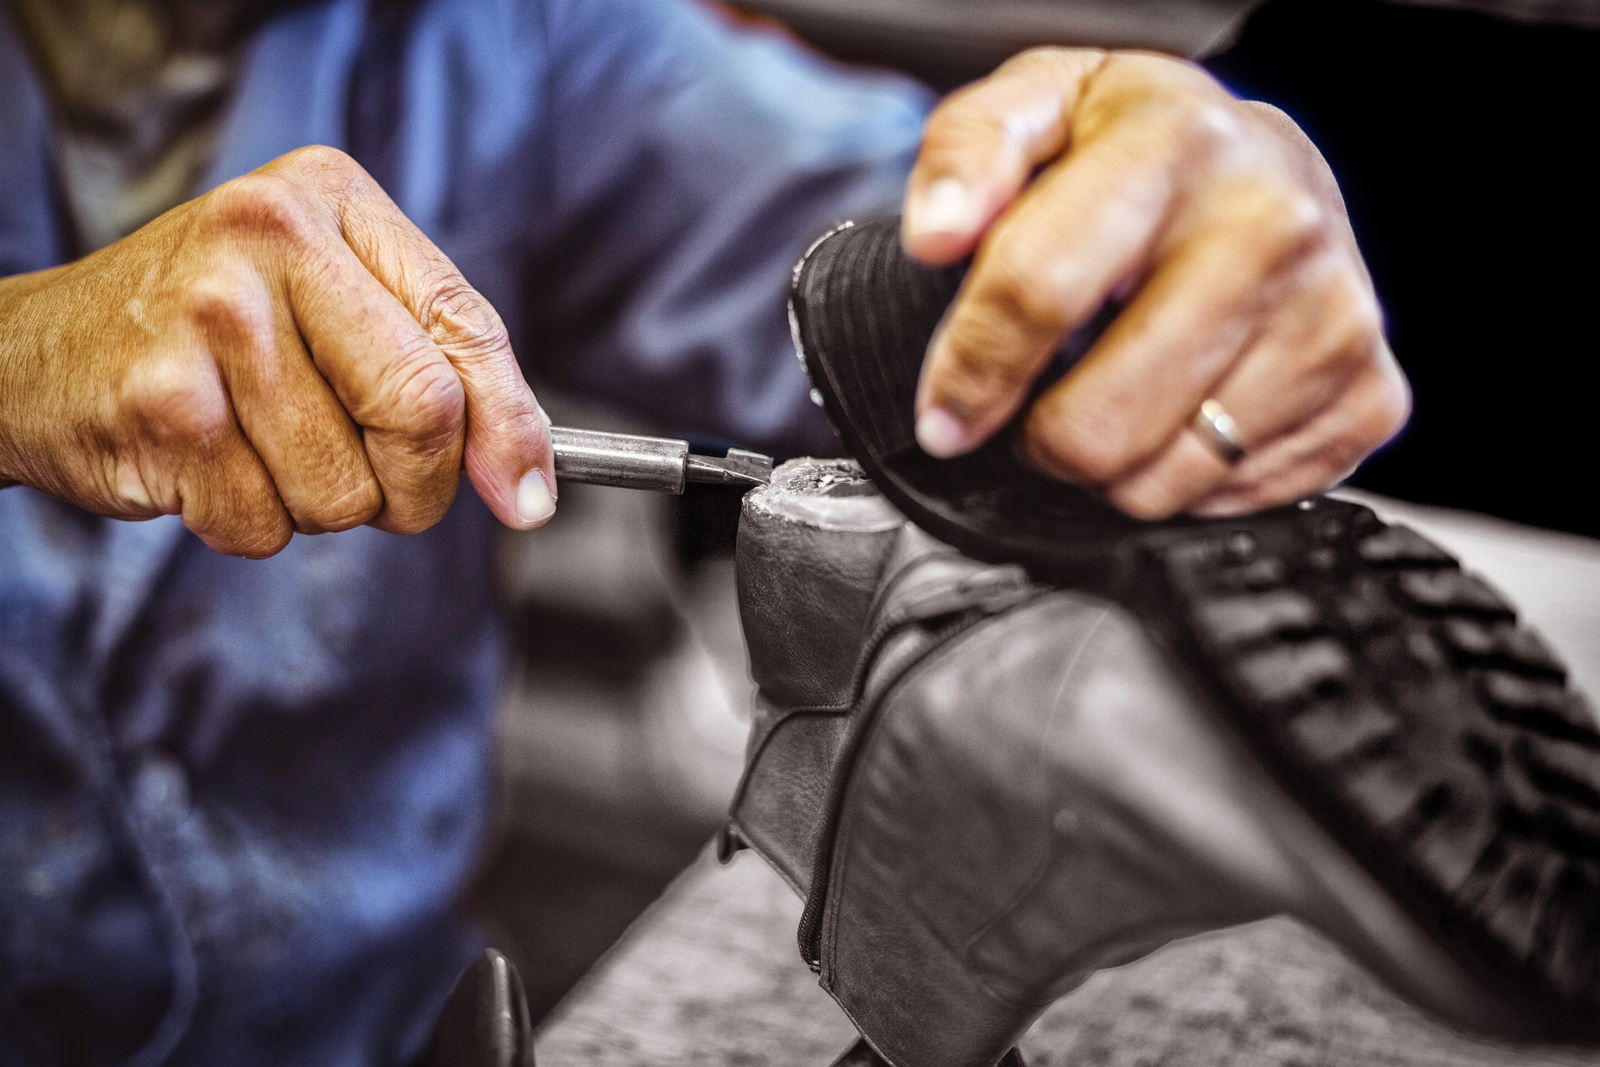 How Much Should It Cost to Get Your Shoes Repaired? - Vox